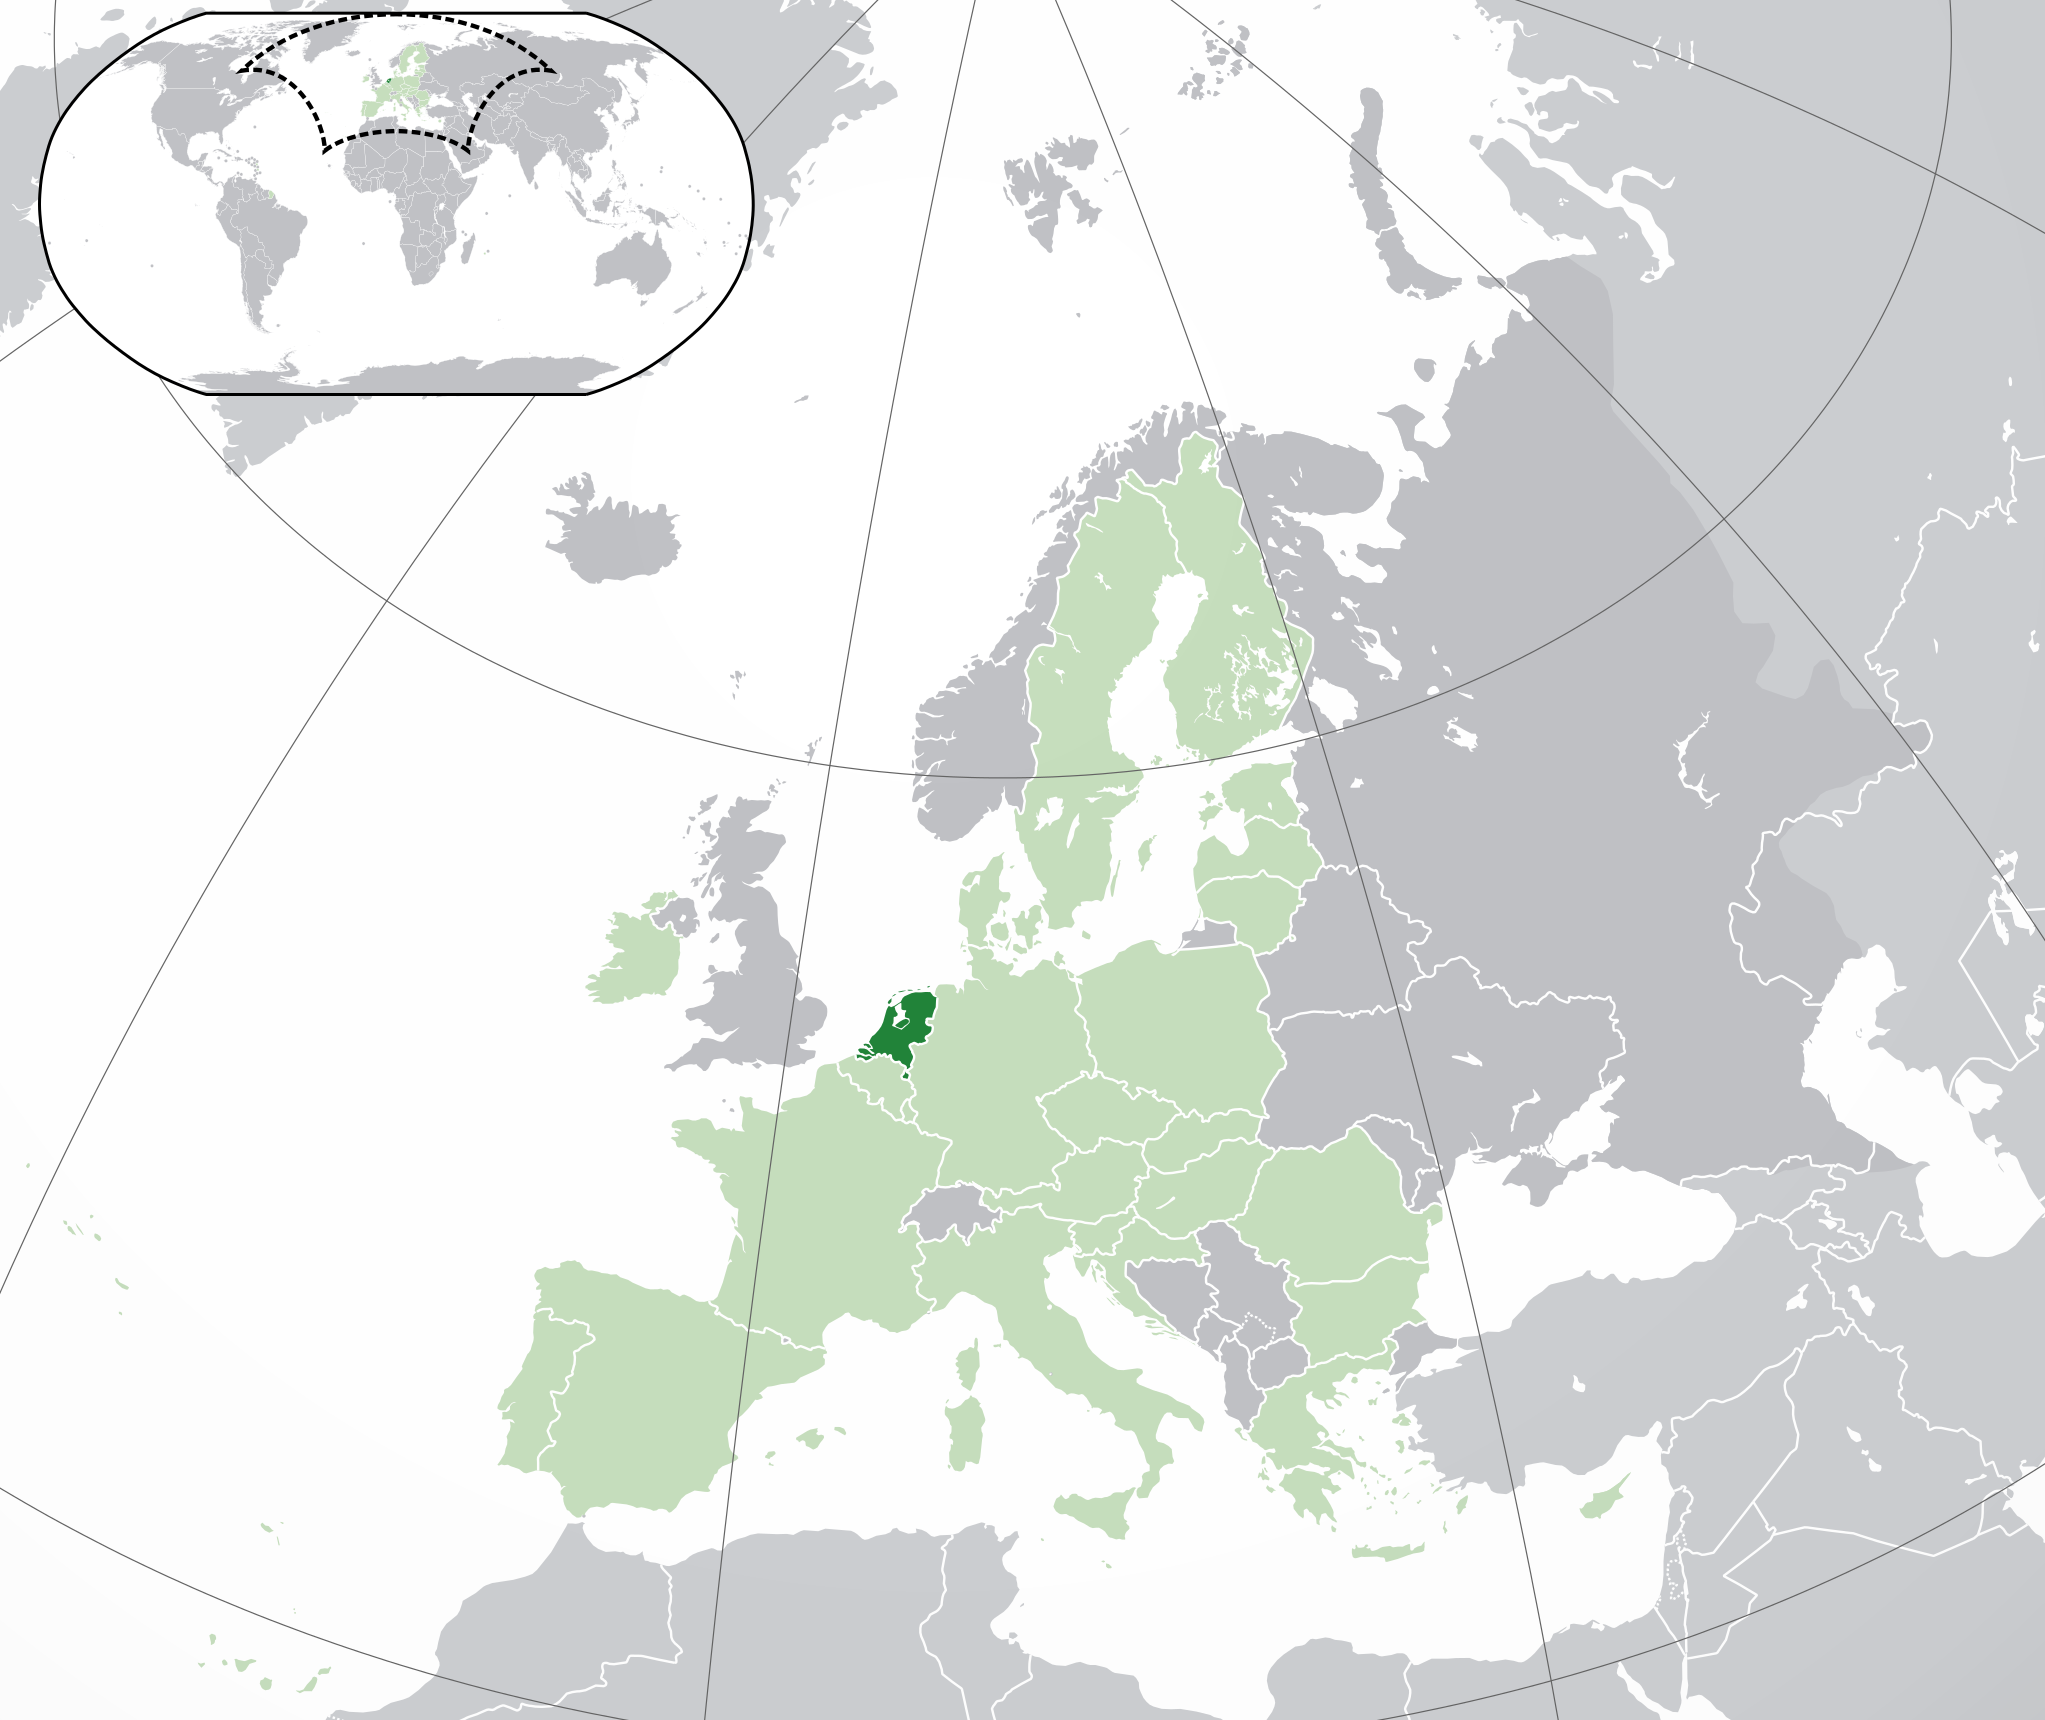 The location of the Netherlands (dark green) in Europe